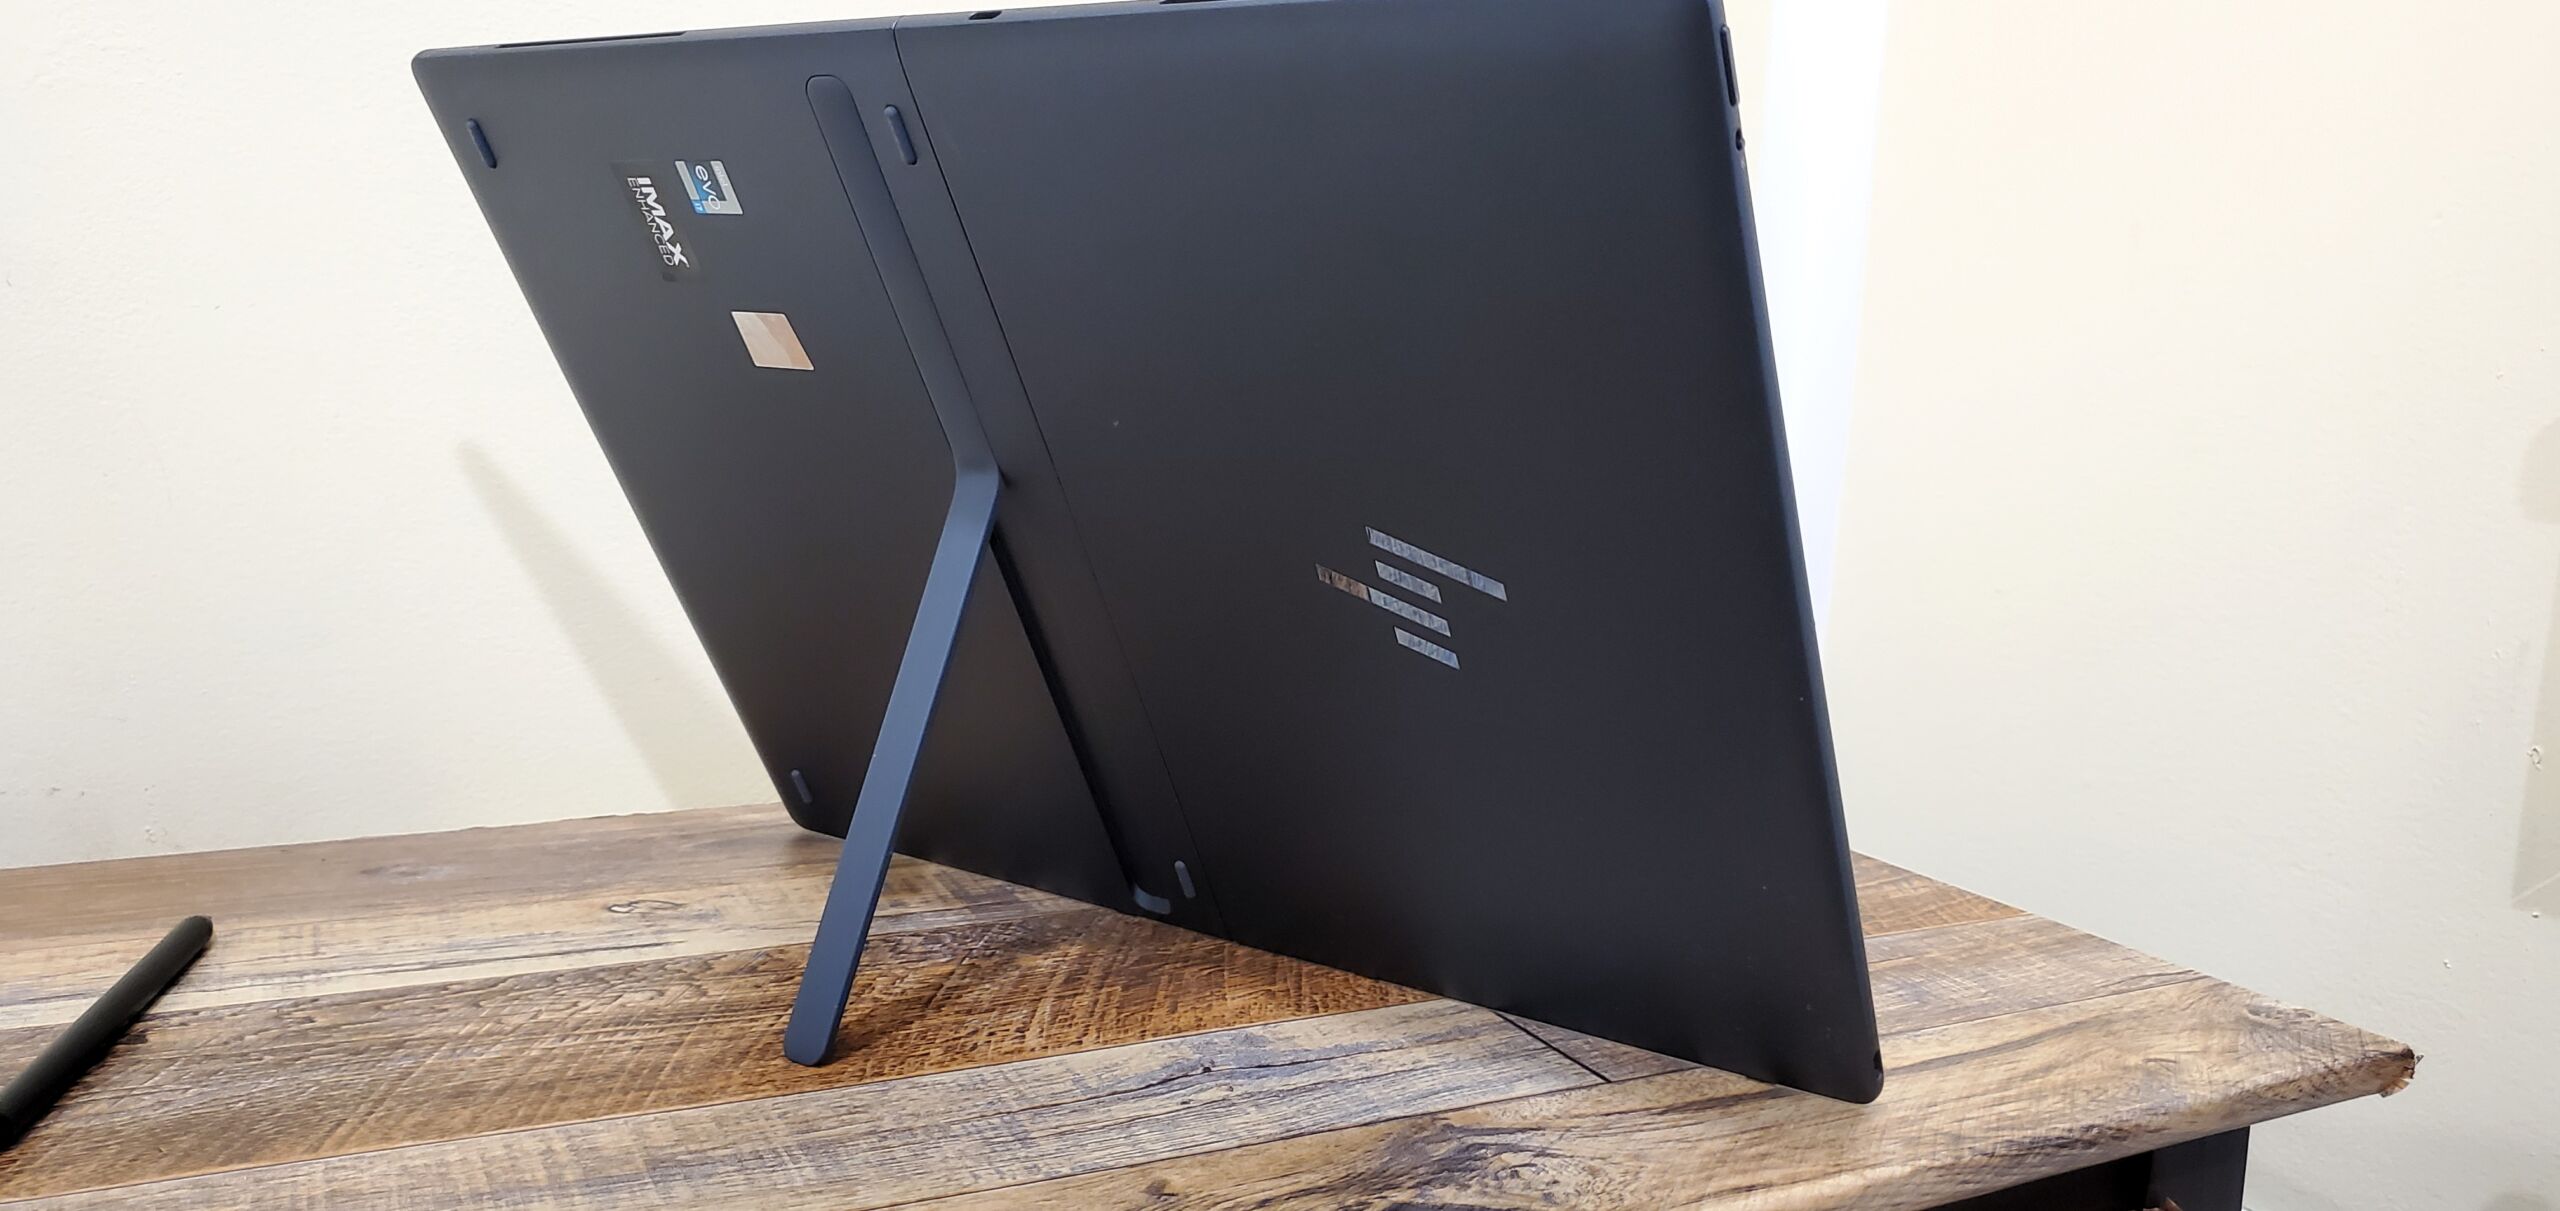 HP's new foldable PC is a dream, except for one big problem